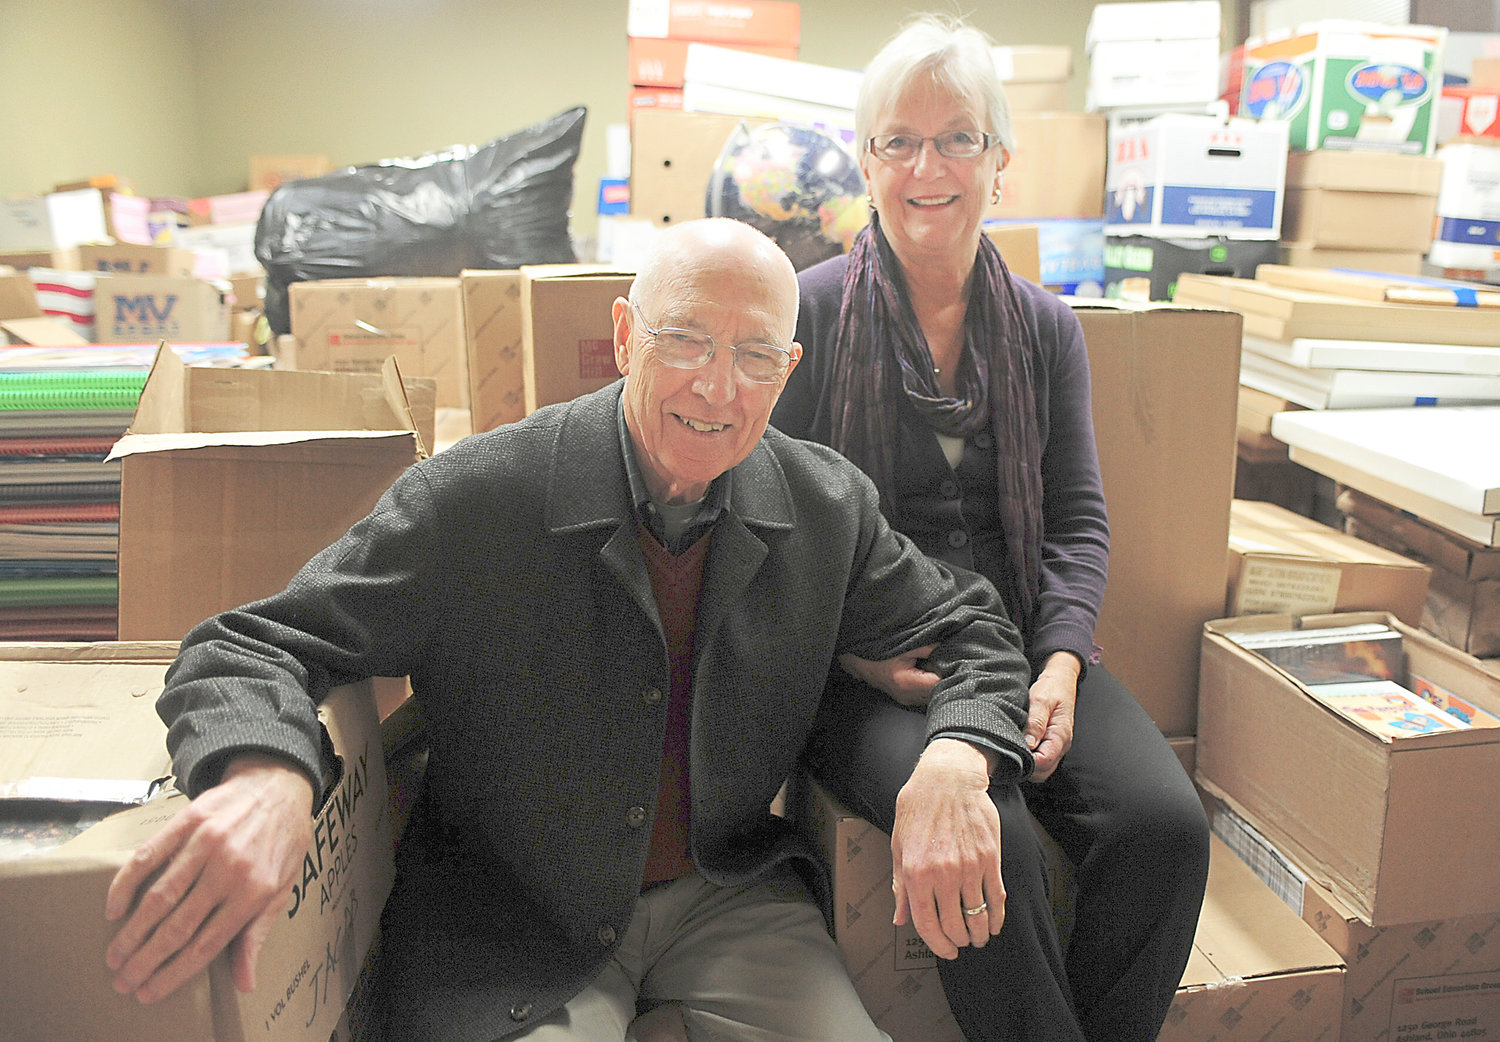 Dr. Larry Hull and his wife, Aarlie, pose for a portrait inside a unit at the Tower Plaza on Friday in Centralia. The Centralia couple have collected thousands of books which they send to libraries in developing countries such as Papua New Guinea. In honor of their years of humanitarian service, the Hulls are being given this year's Evergreen Award.